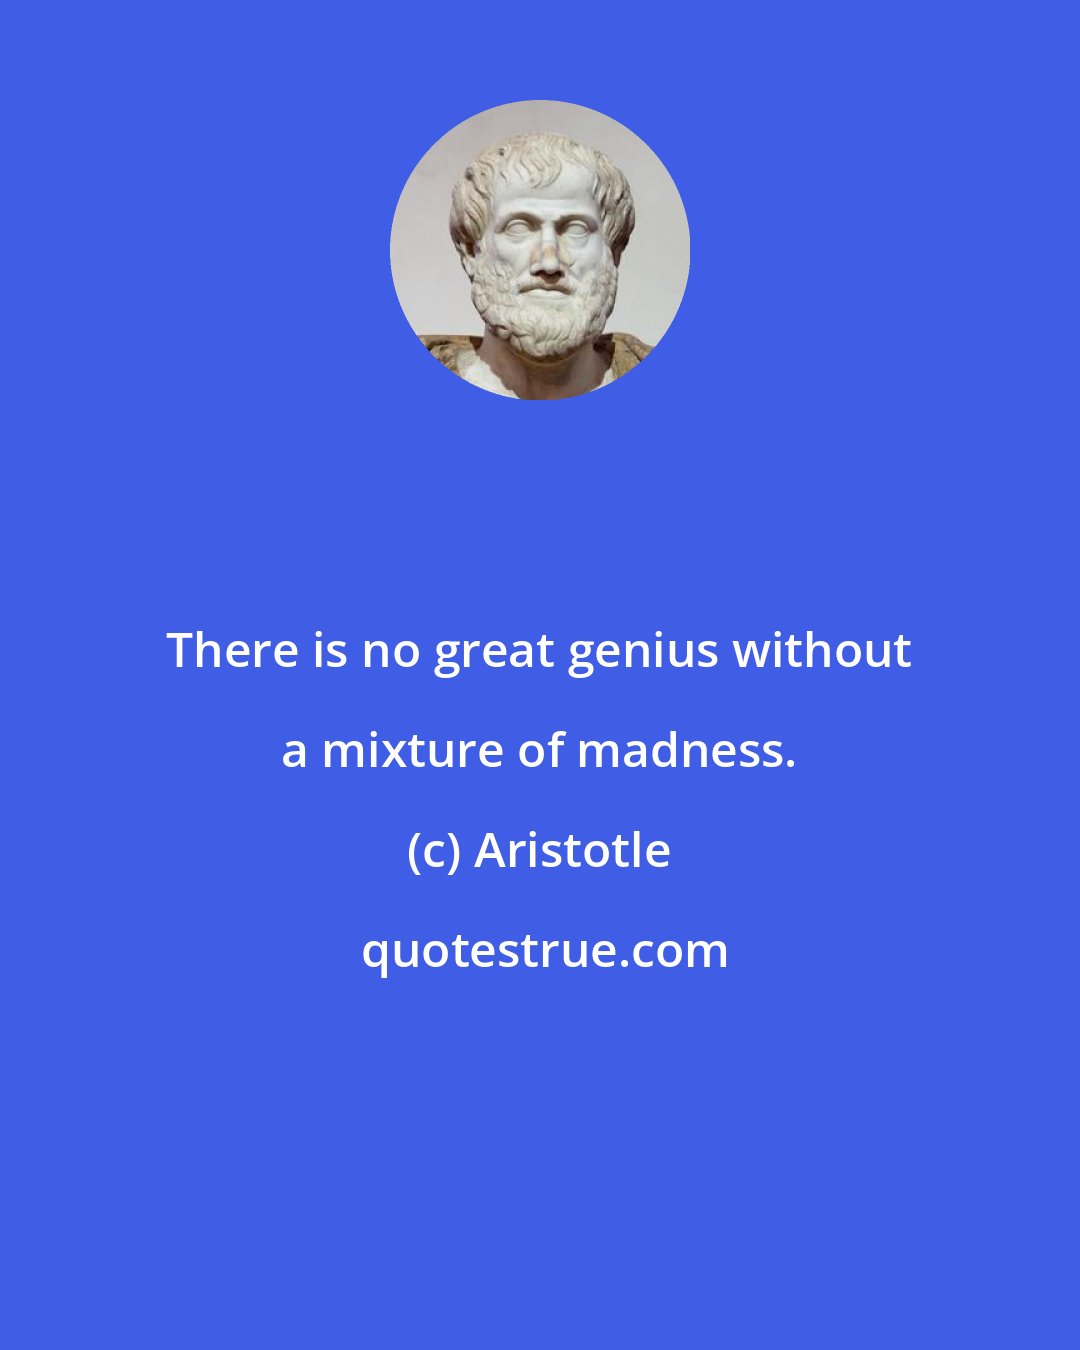 Aristotle: There is no great genius without a mixture of madness.